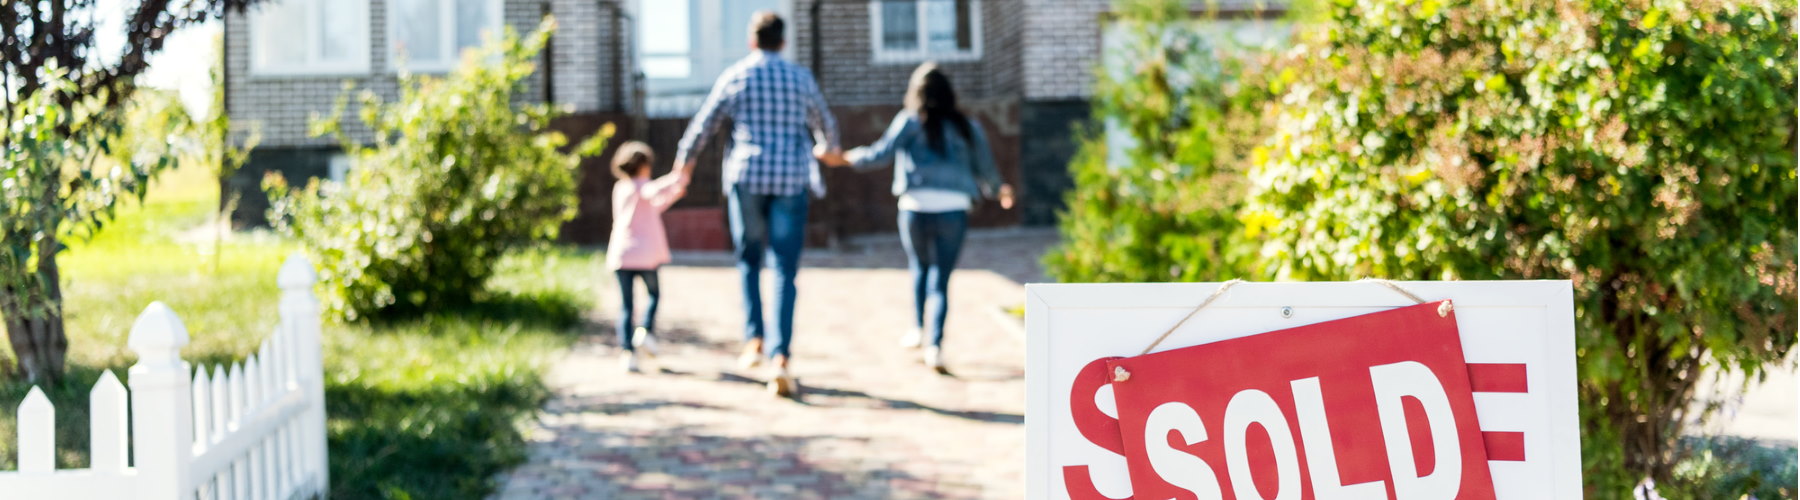 Personal insurance represented by family posing walking into new home